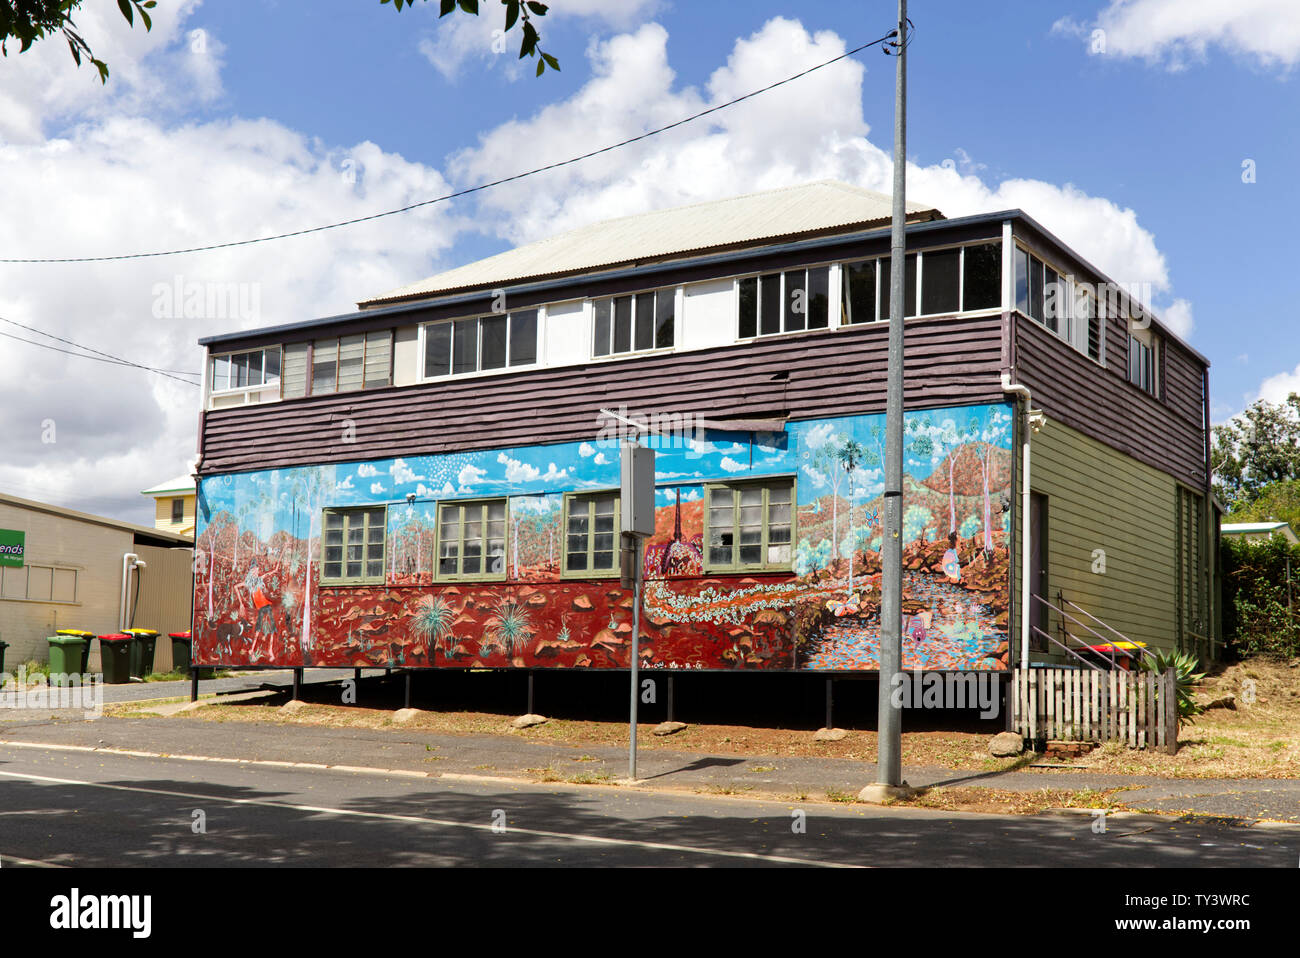 A public mural which brightens up some of the old architecture Mount Morgan Queensland Australia Stock Photo